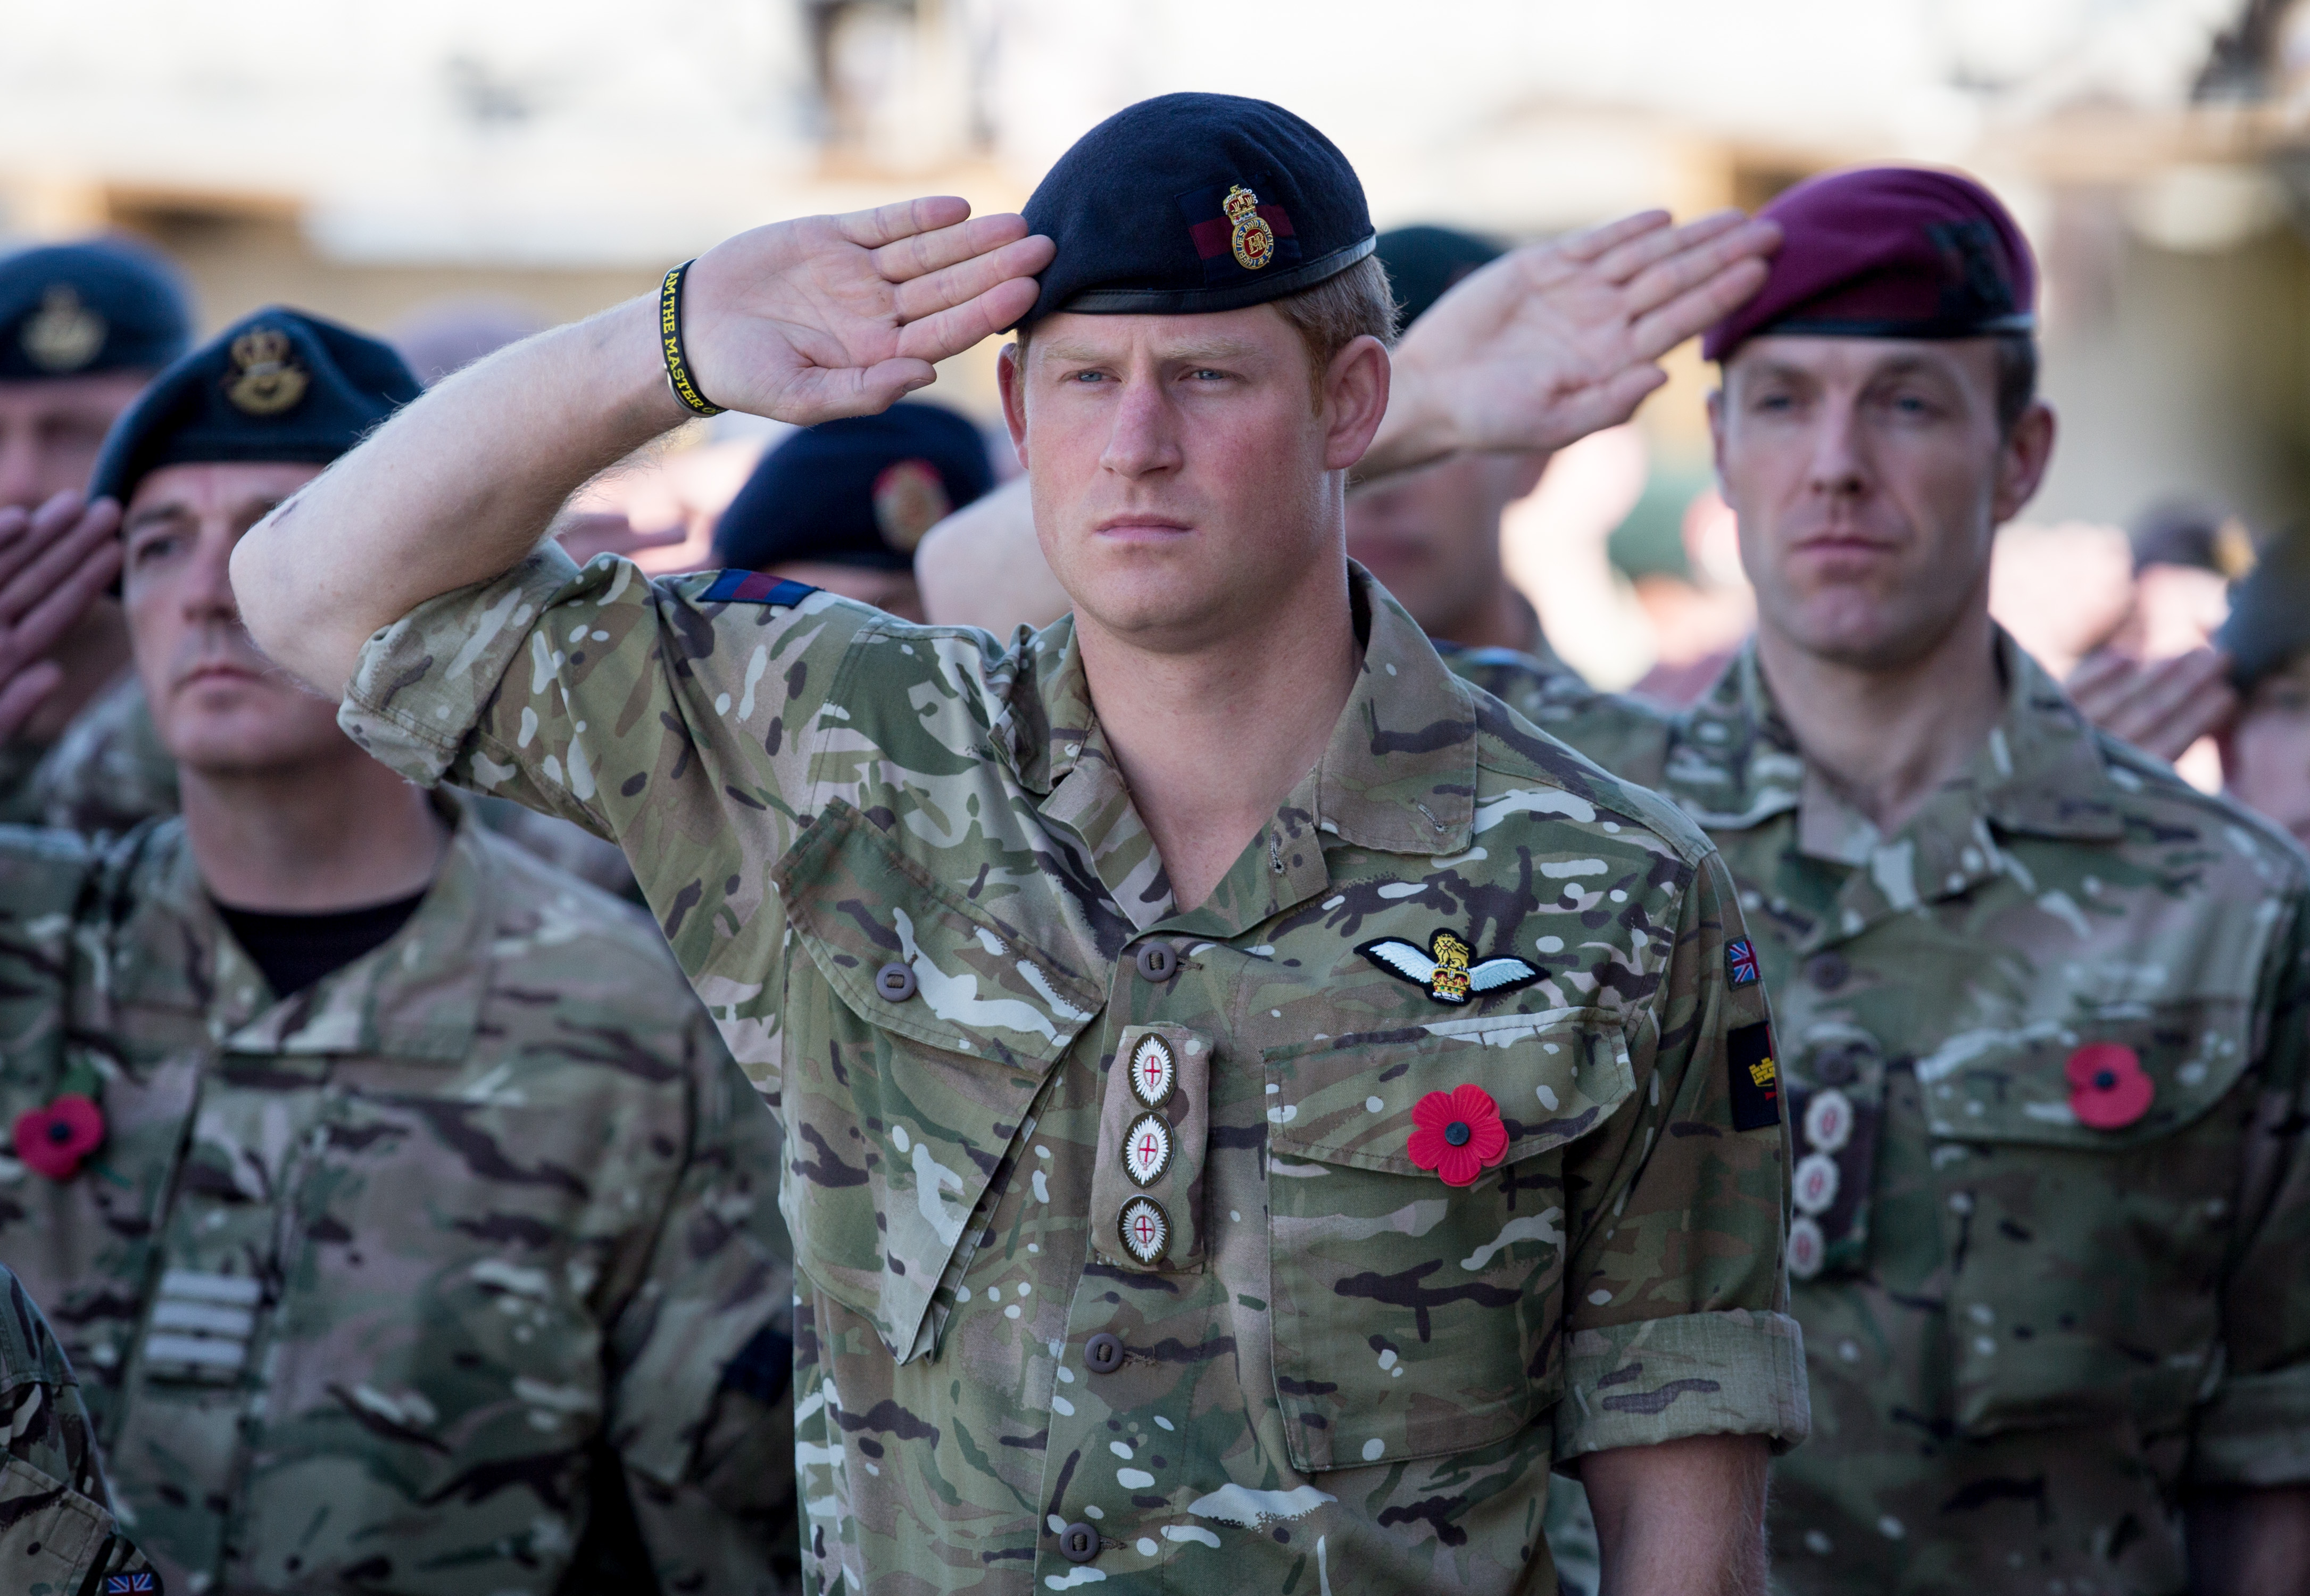 Prince Harry in uniform along with other British troops saluting on Remembrance Day